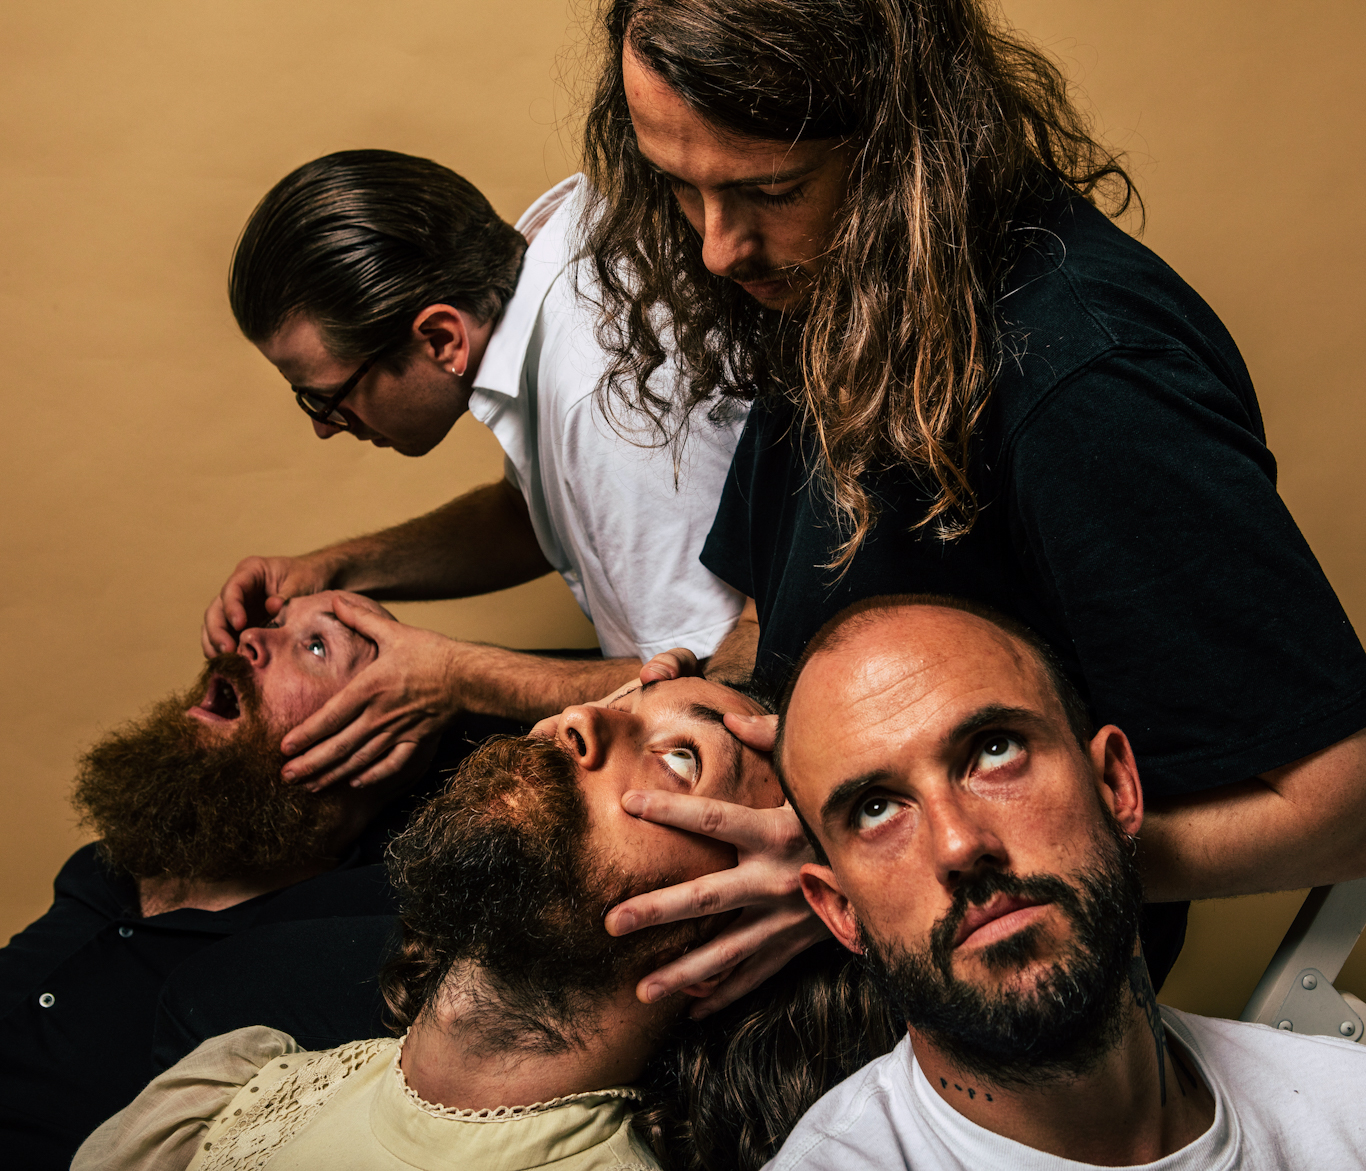 IDLES release video for 'When The Lights Come On' 